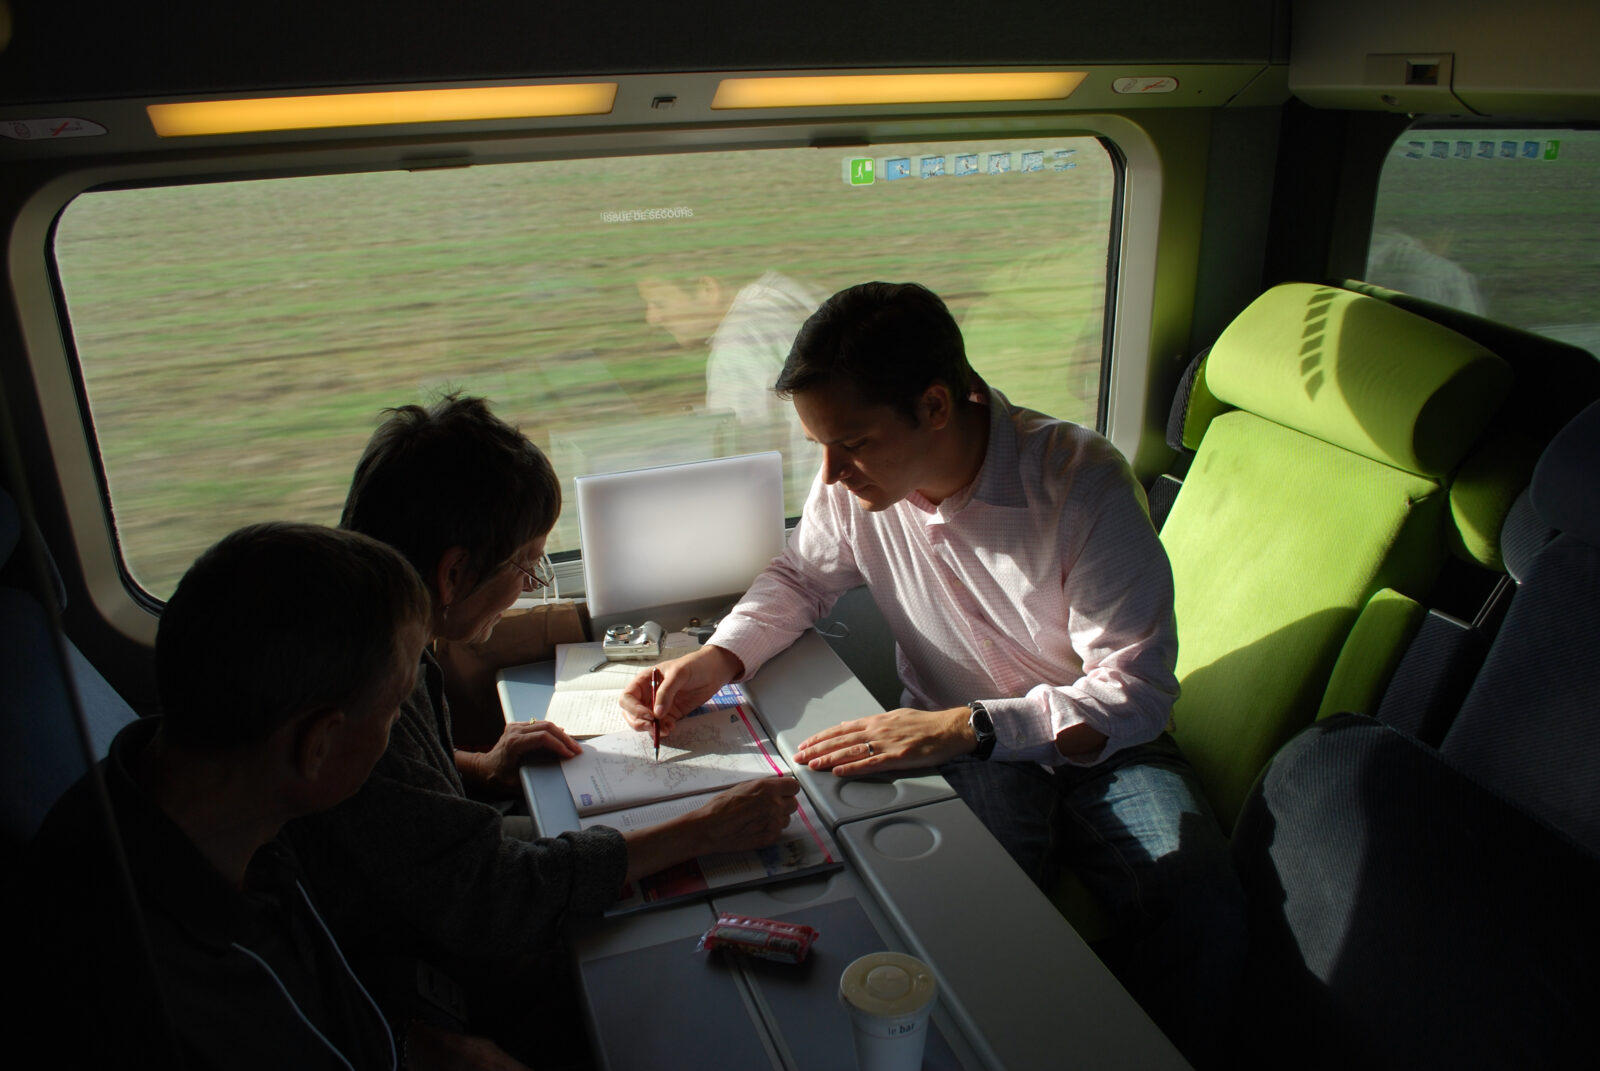 A man pointing at a document while sitting across from two freinds at a table in a high-speed train with field blurbed in background.